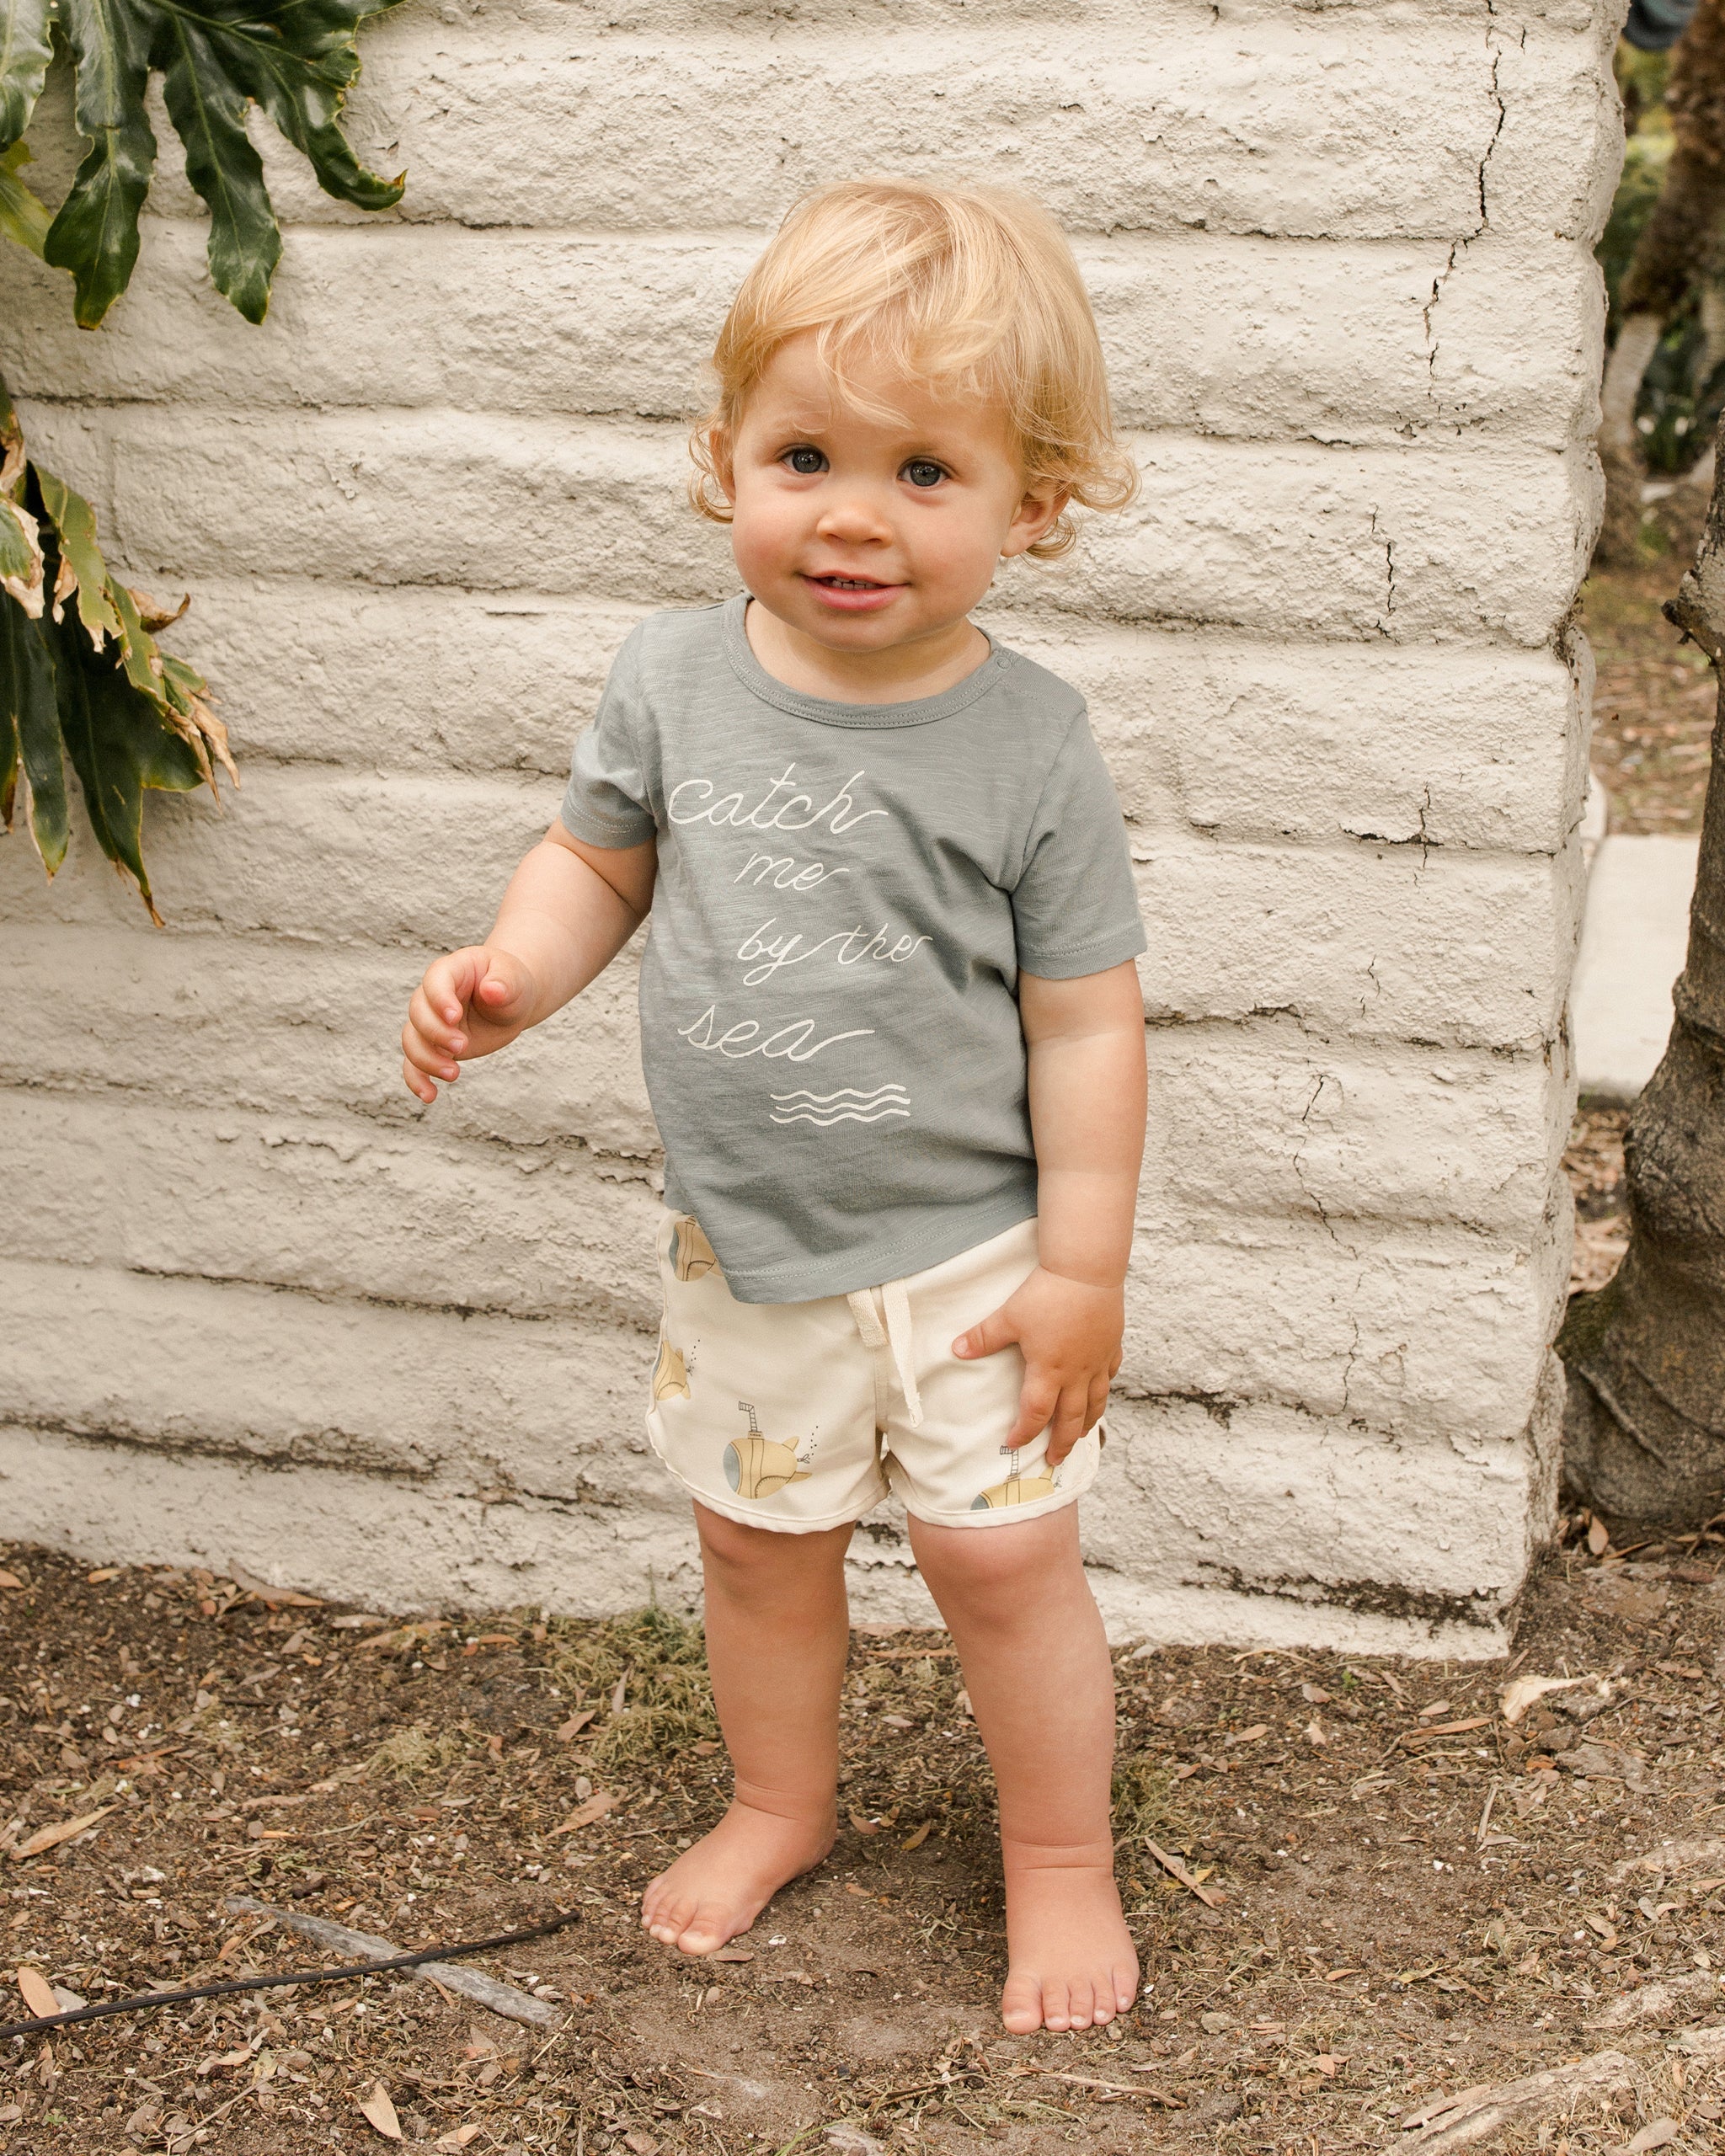 Basic Tee || Catch Me By The Sea - Rylee + Cru | Kids Clothes | Trendy Baby Clothes | Modern Infant Outfits |